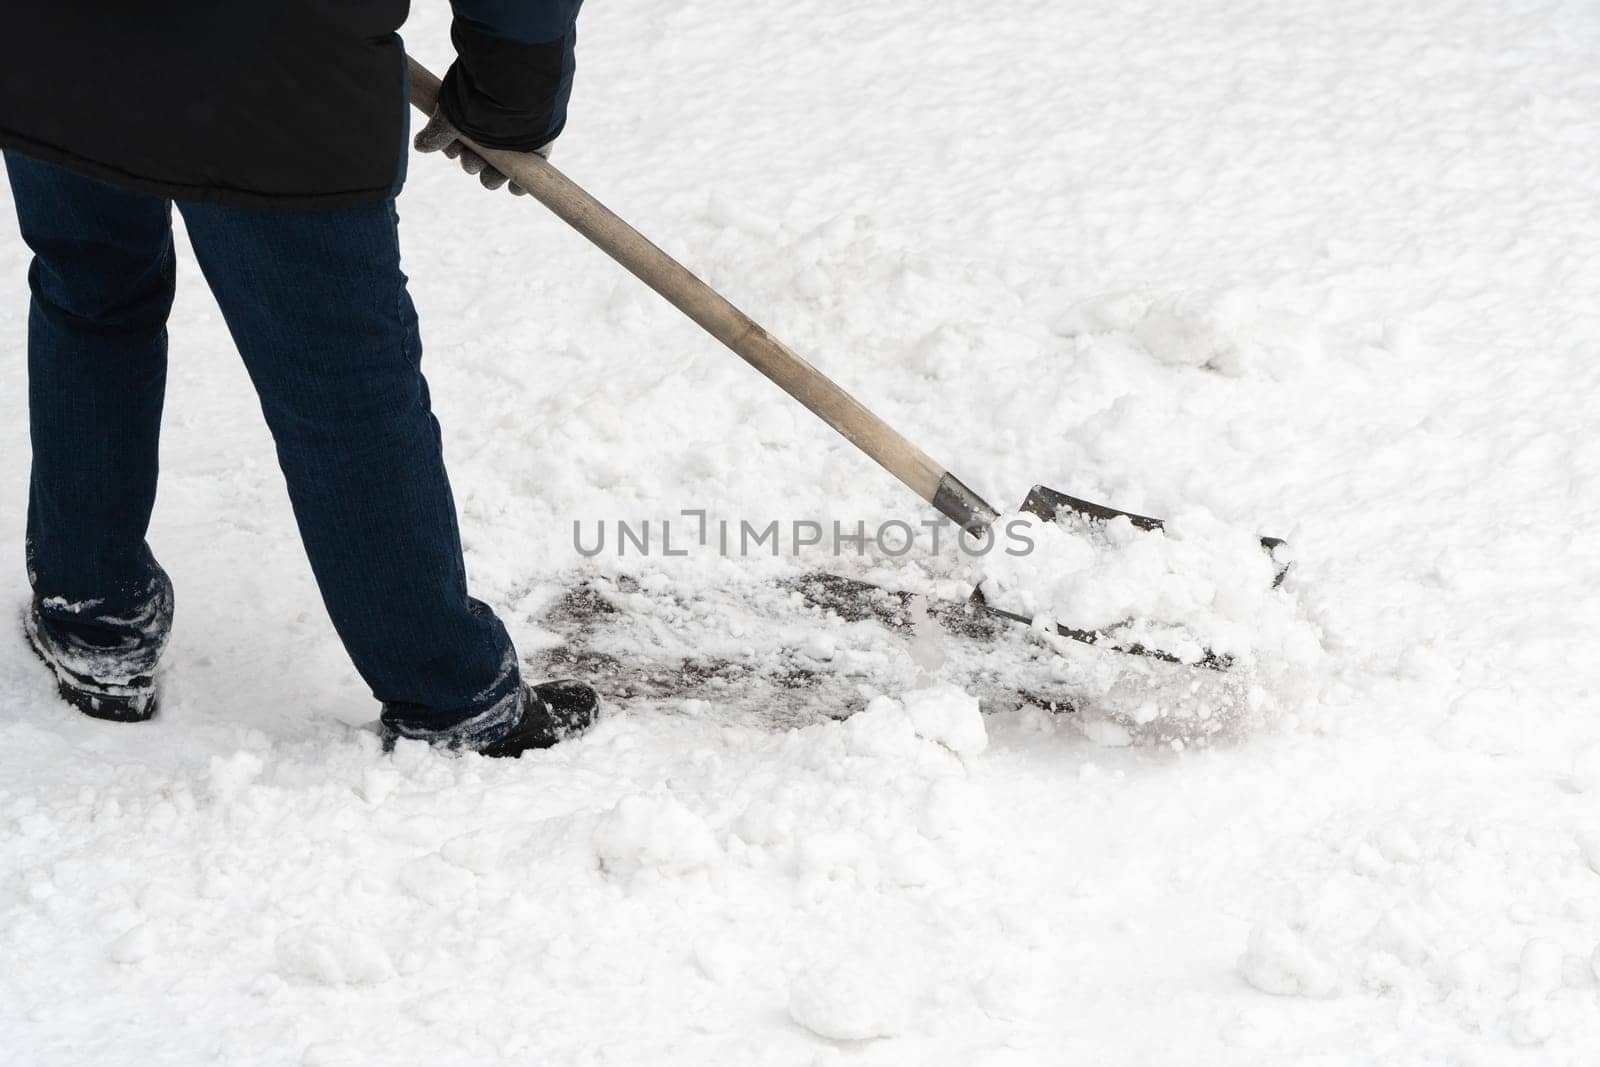 A hardworking man clearing away the freshly fallen snow with his trusty iron shovel, complete with a sturdy wooden handle. A close-up view of the snow removal process